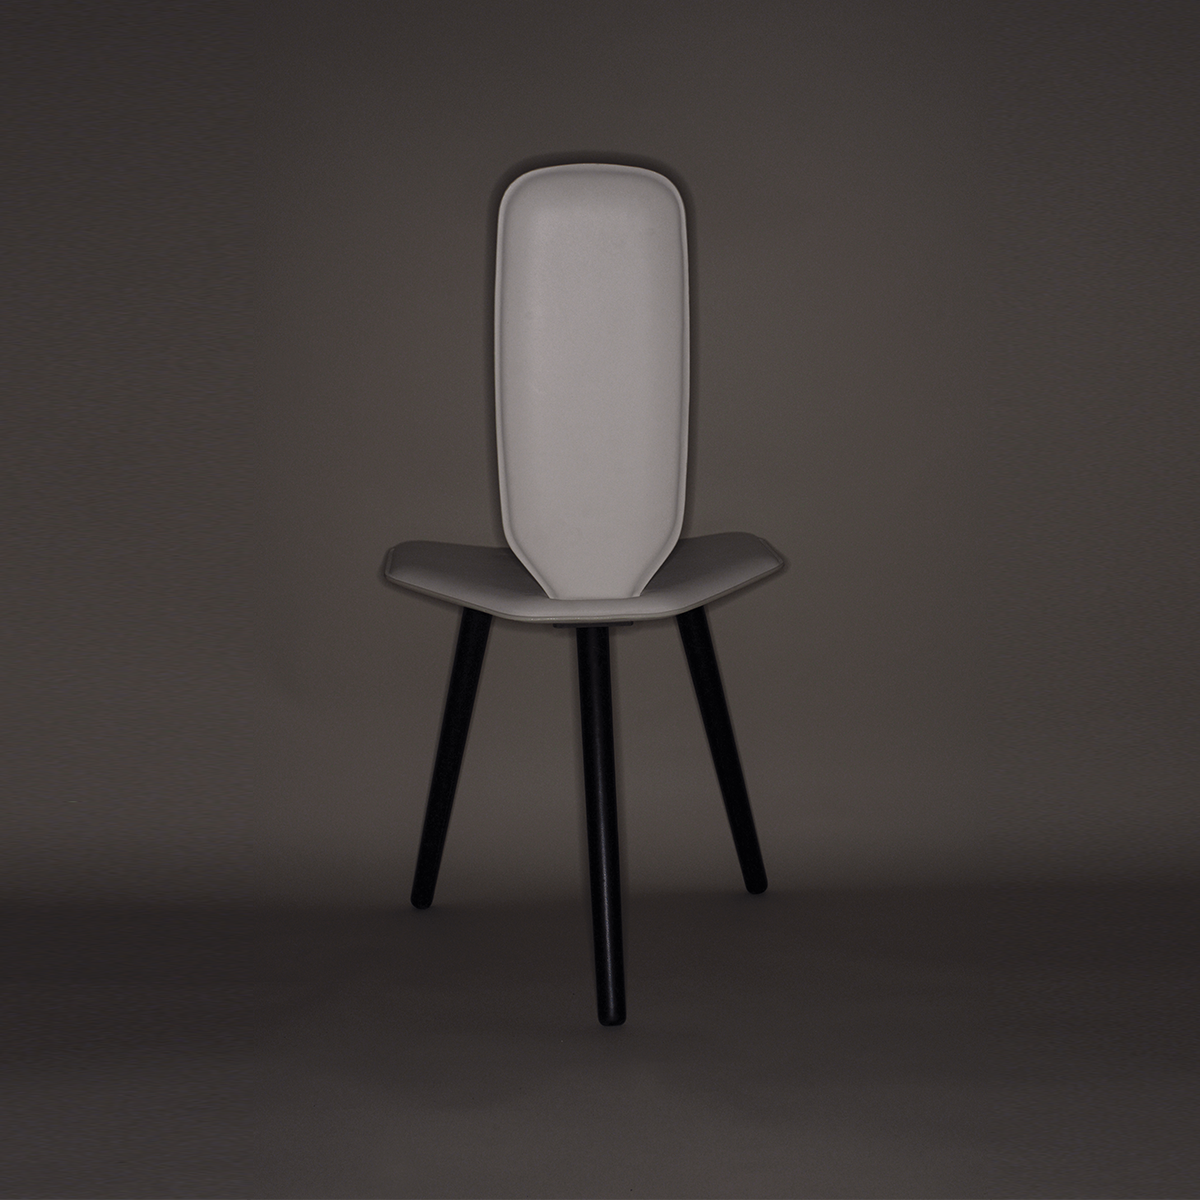 Bavaresk High dining chair grey by Christophe de la Fontaine for DANTE - Goods and Bads